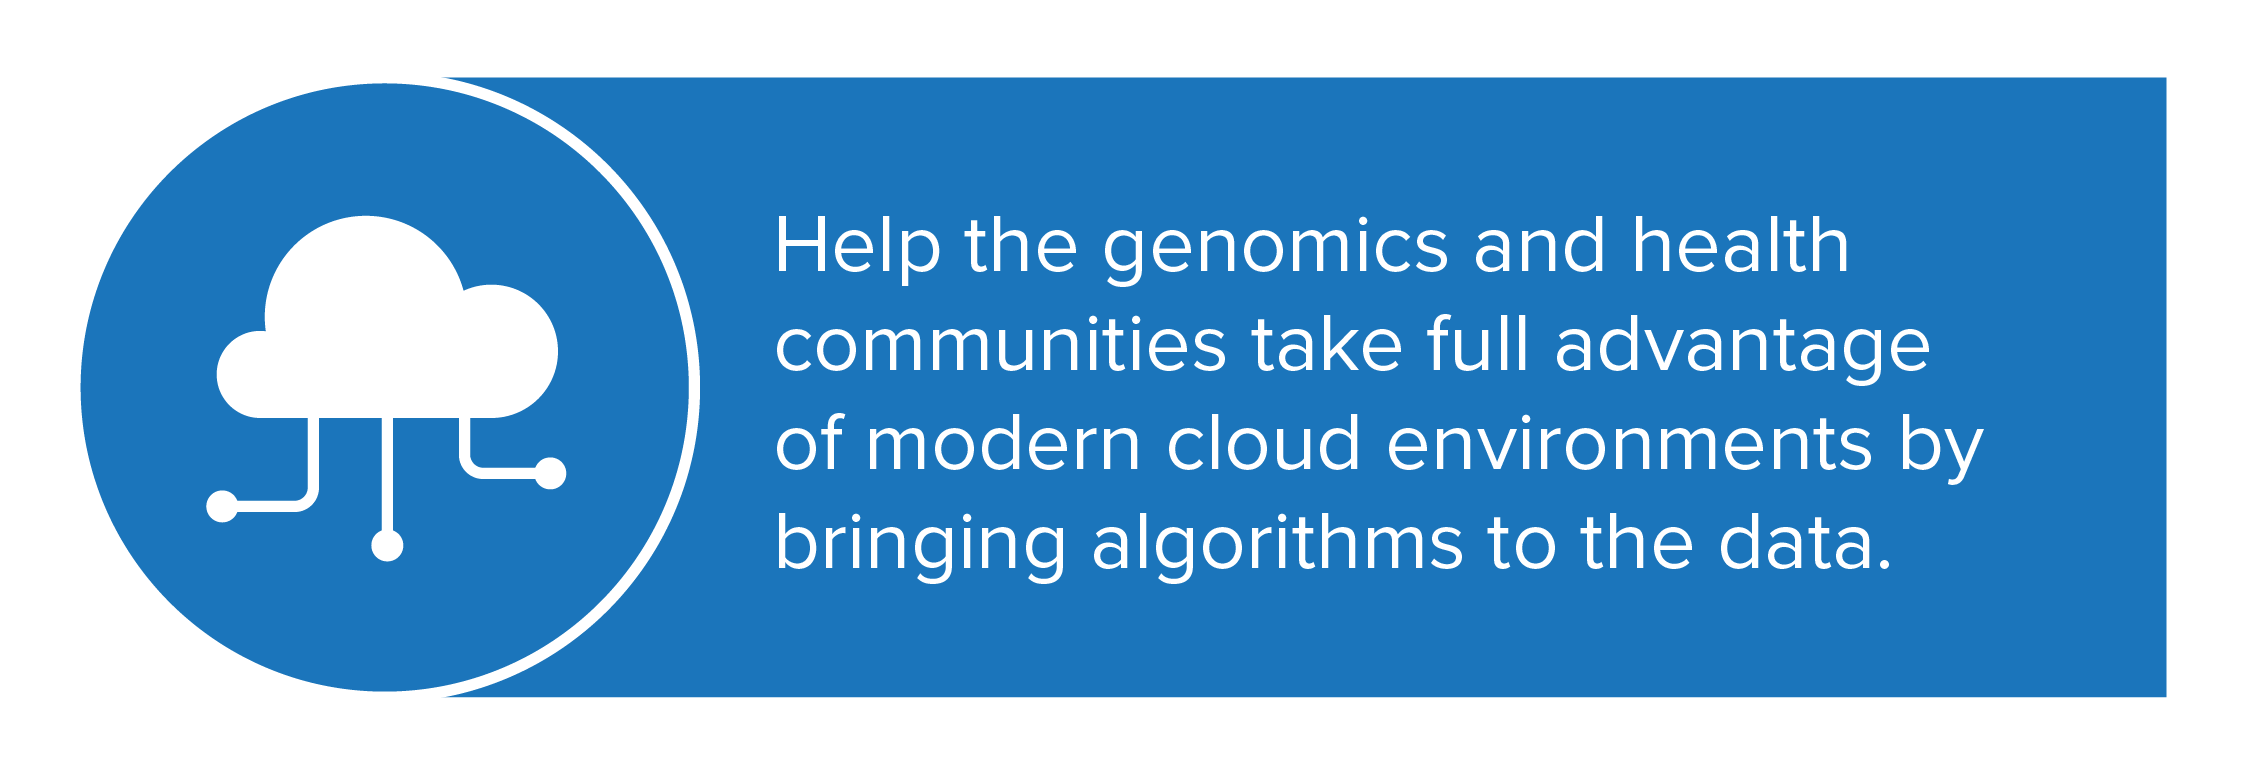 The Cloud Work Stream helps the genomics and health communities take full advantage of modern cloud environments by bringing algorithms to data.